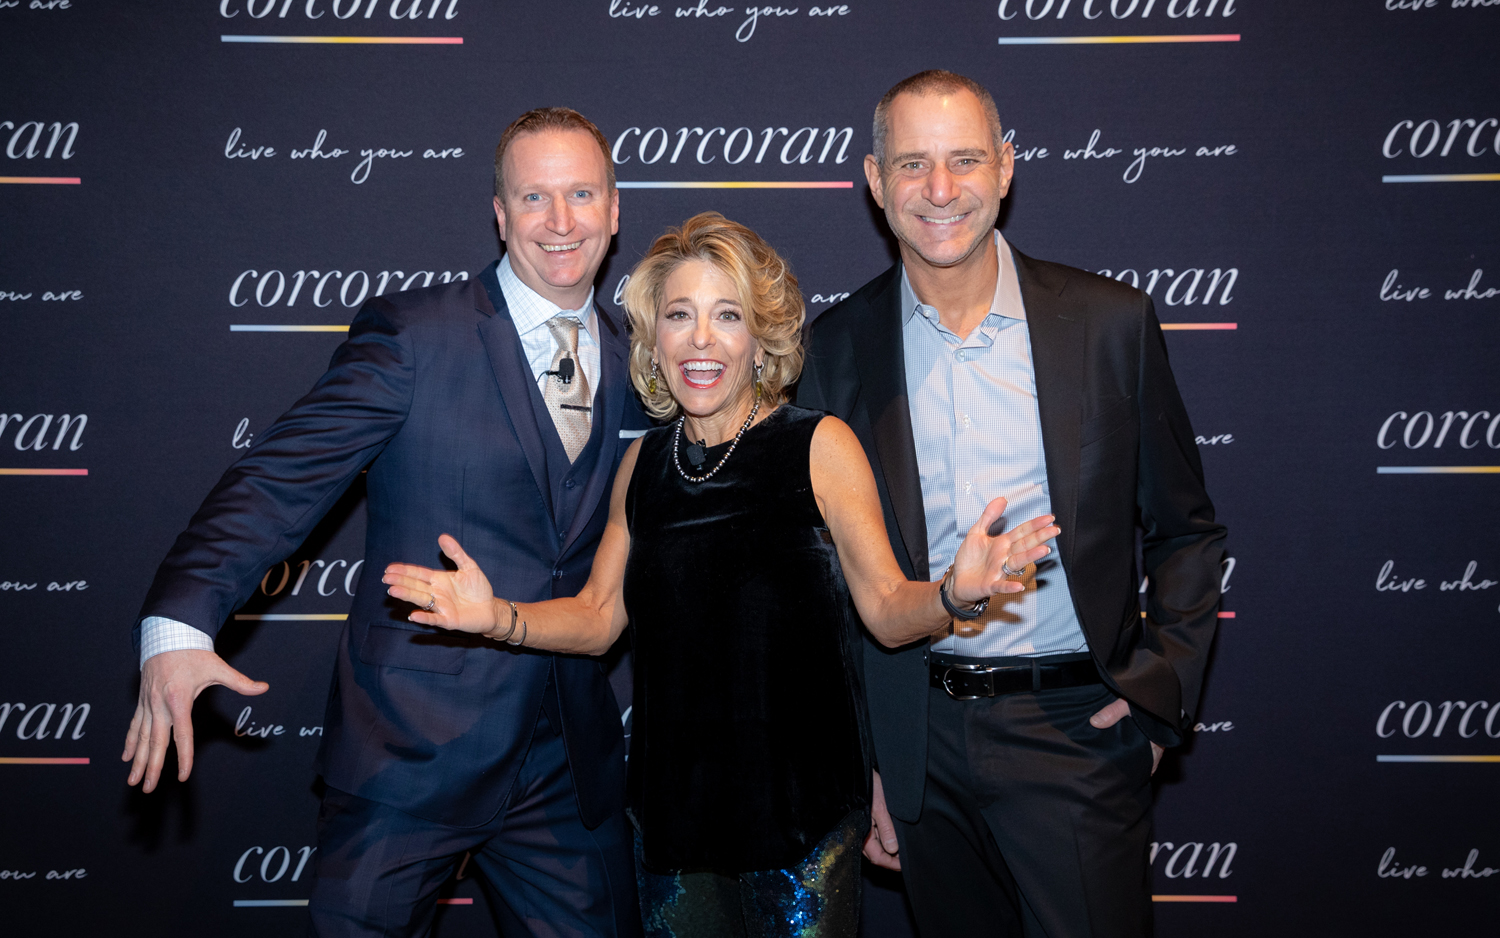 Steve Gold, Cathy Franklin Among Corcoran’s Top Agents